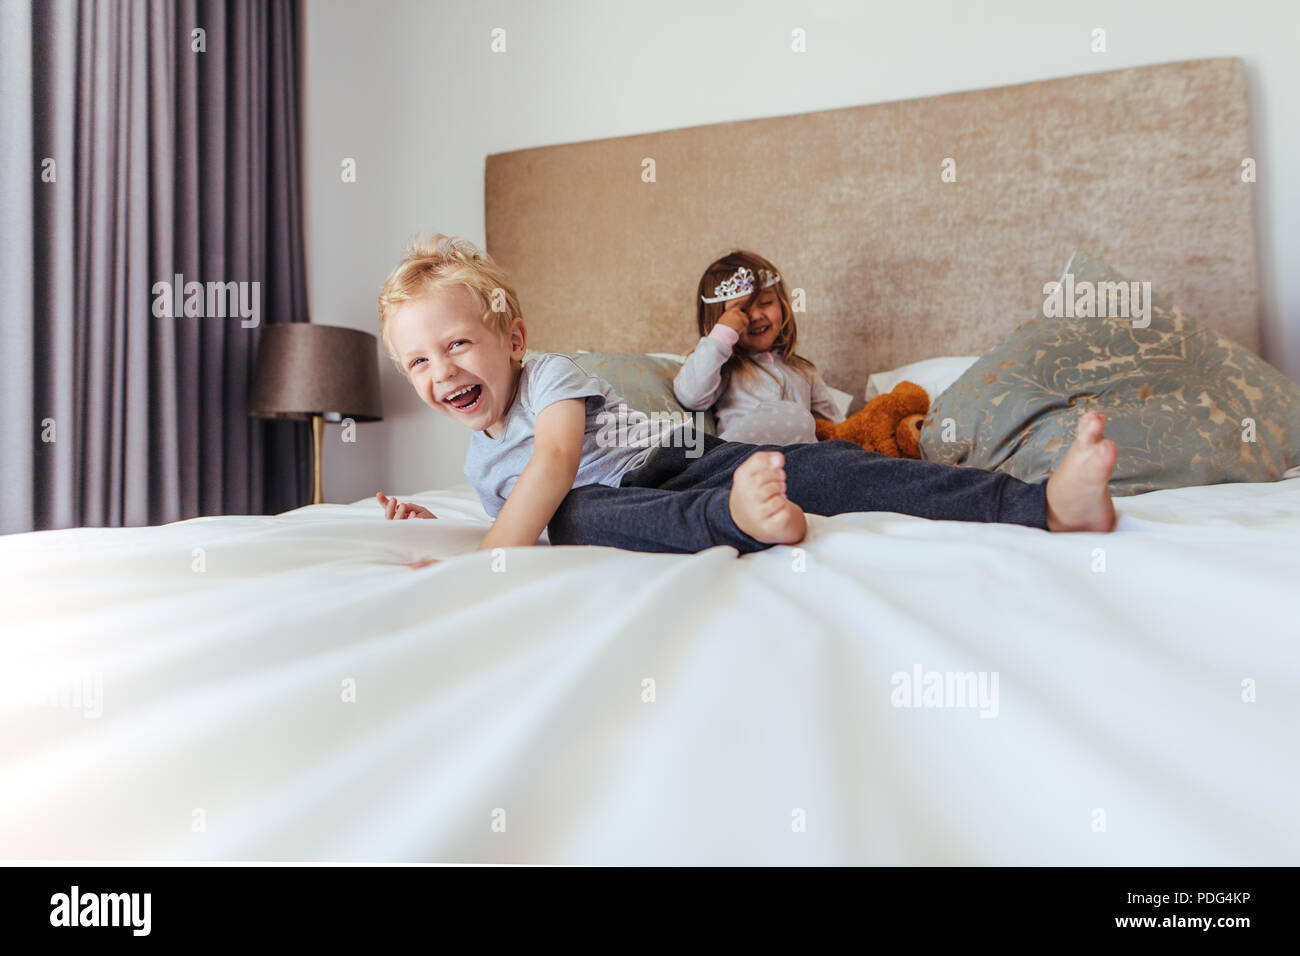 Happy kids playing in bedroom. Little boy smiling with girl at the back in crown on the bed. Stock Photo